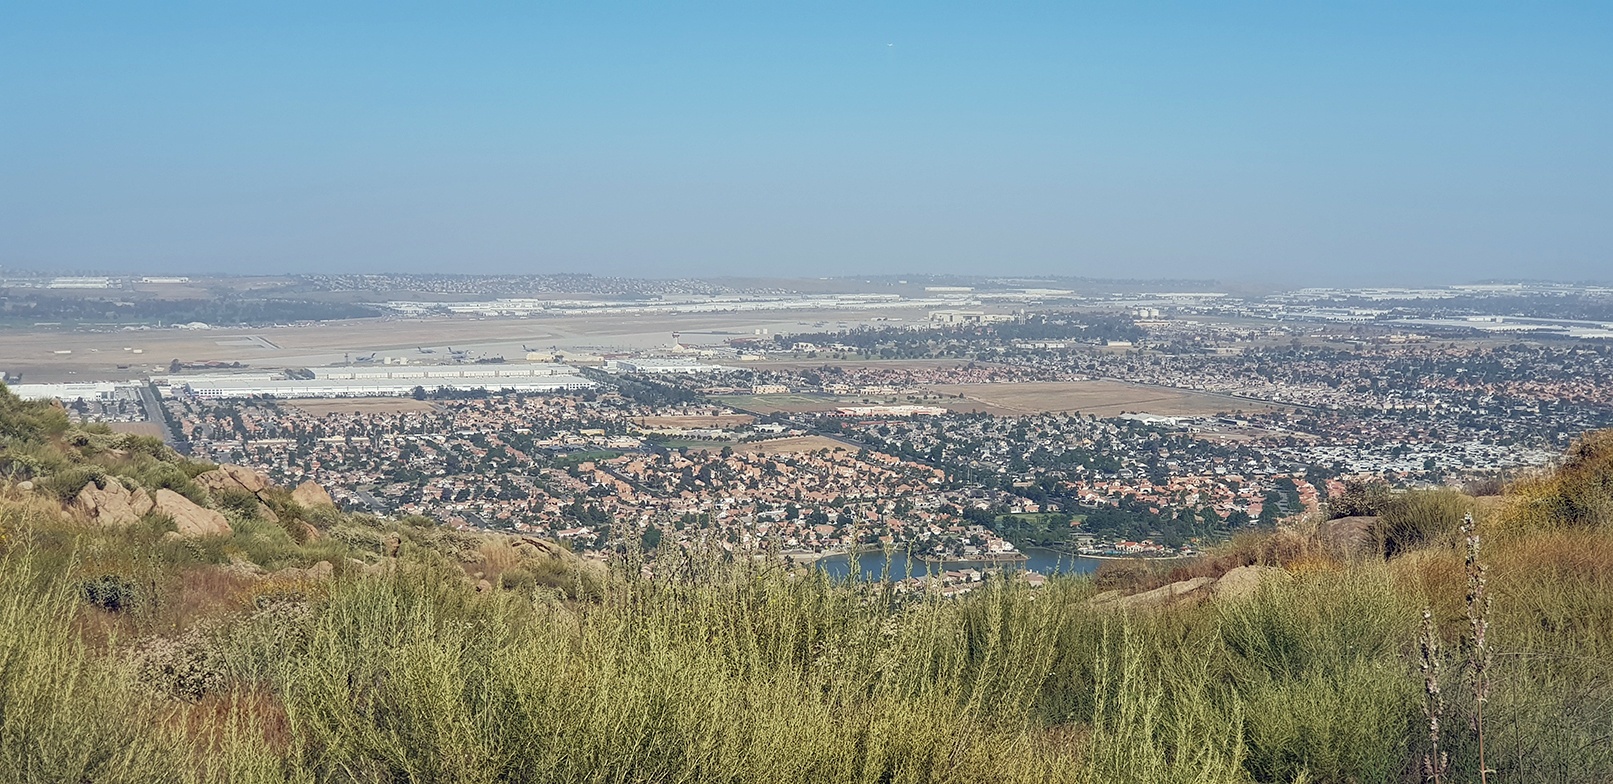 View from Terri Peak over the Perris valley.